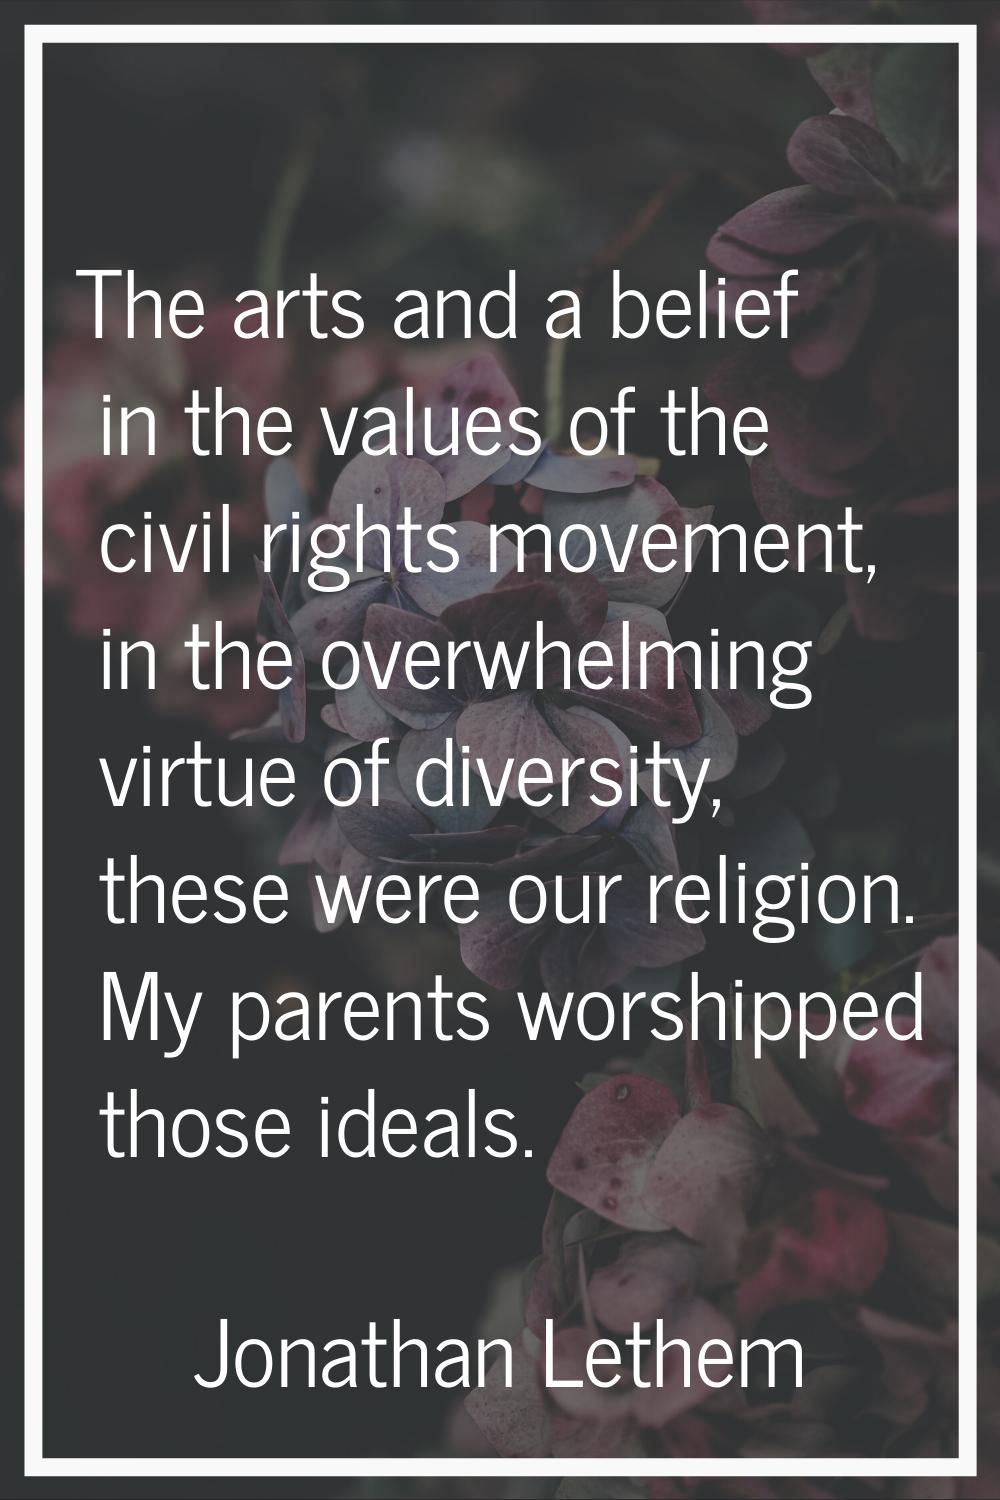 The arts and a belief in the values of the civil rights movement, in the overwhelming virtue of div